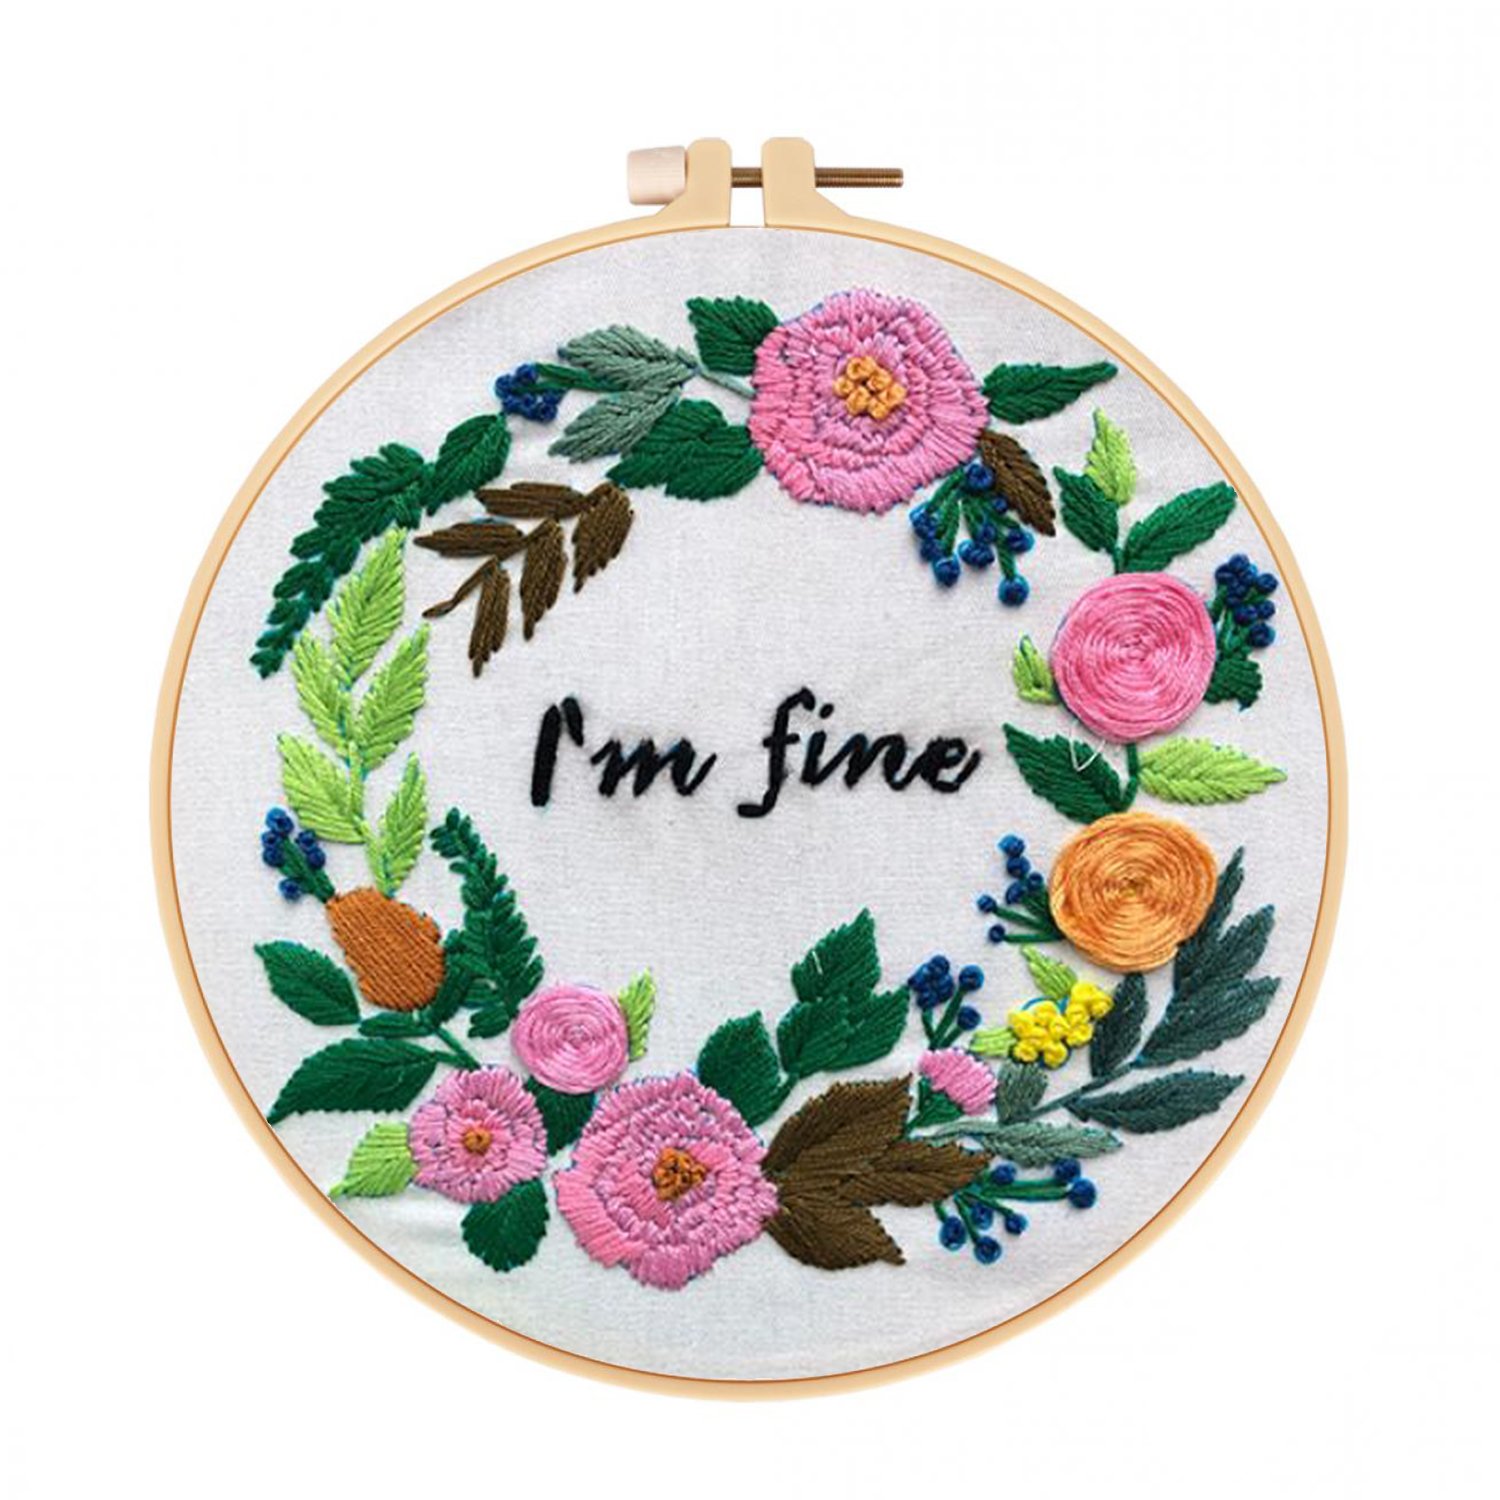 Craft Hand Embroidery Kit Cross stitch kit for Adult Beginner - Floral Words Pattern